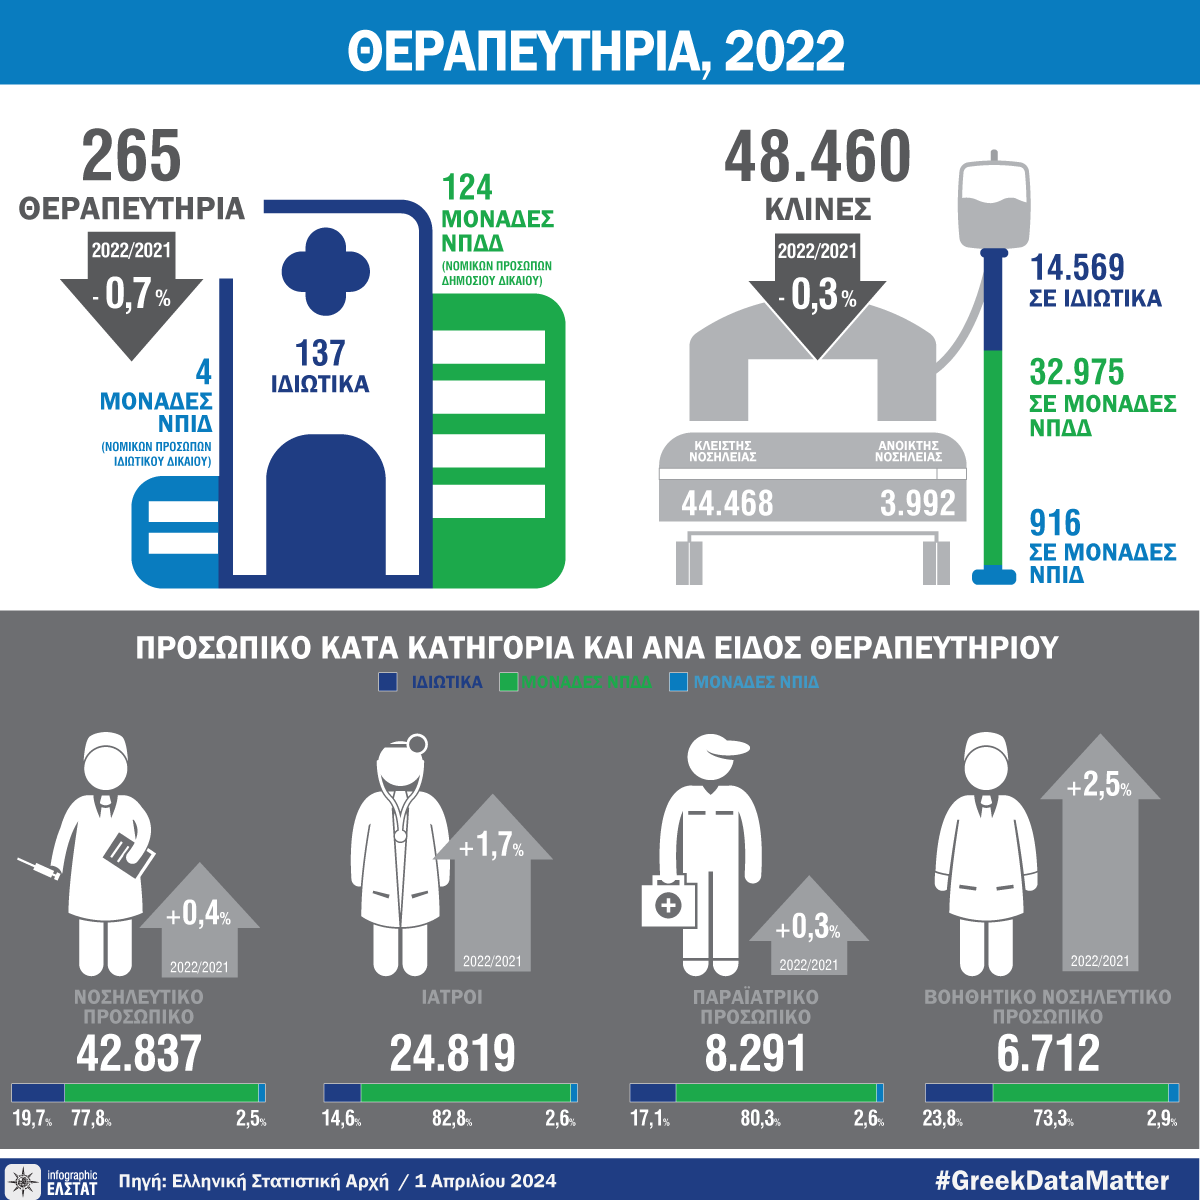 DT therapeythria 2022